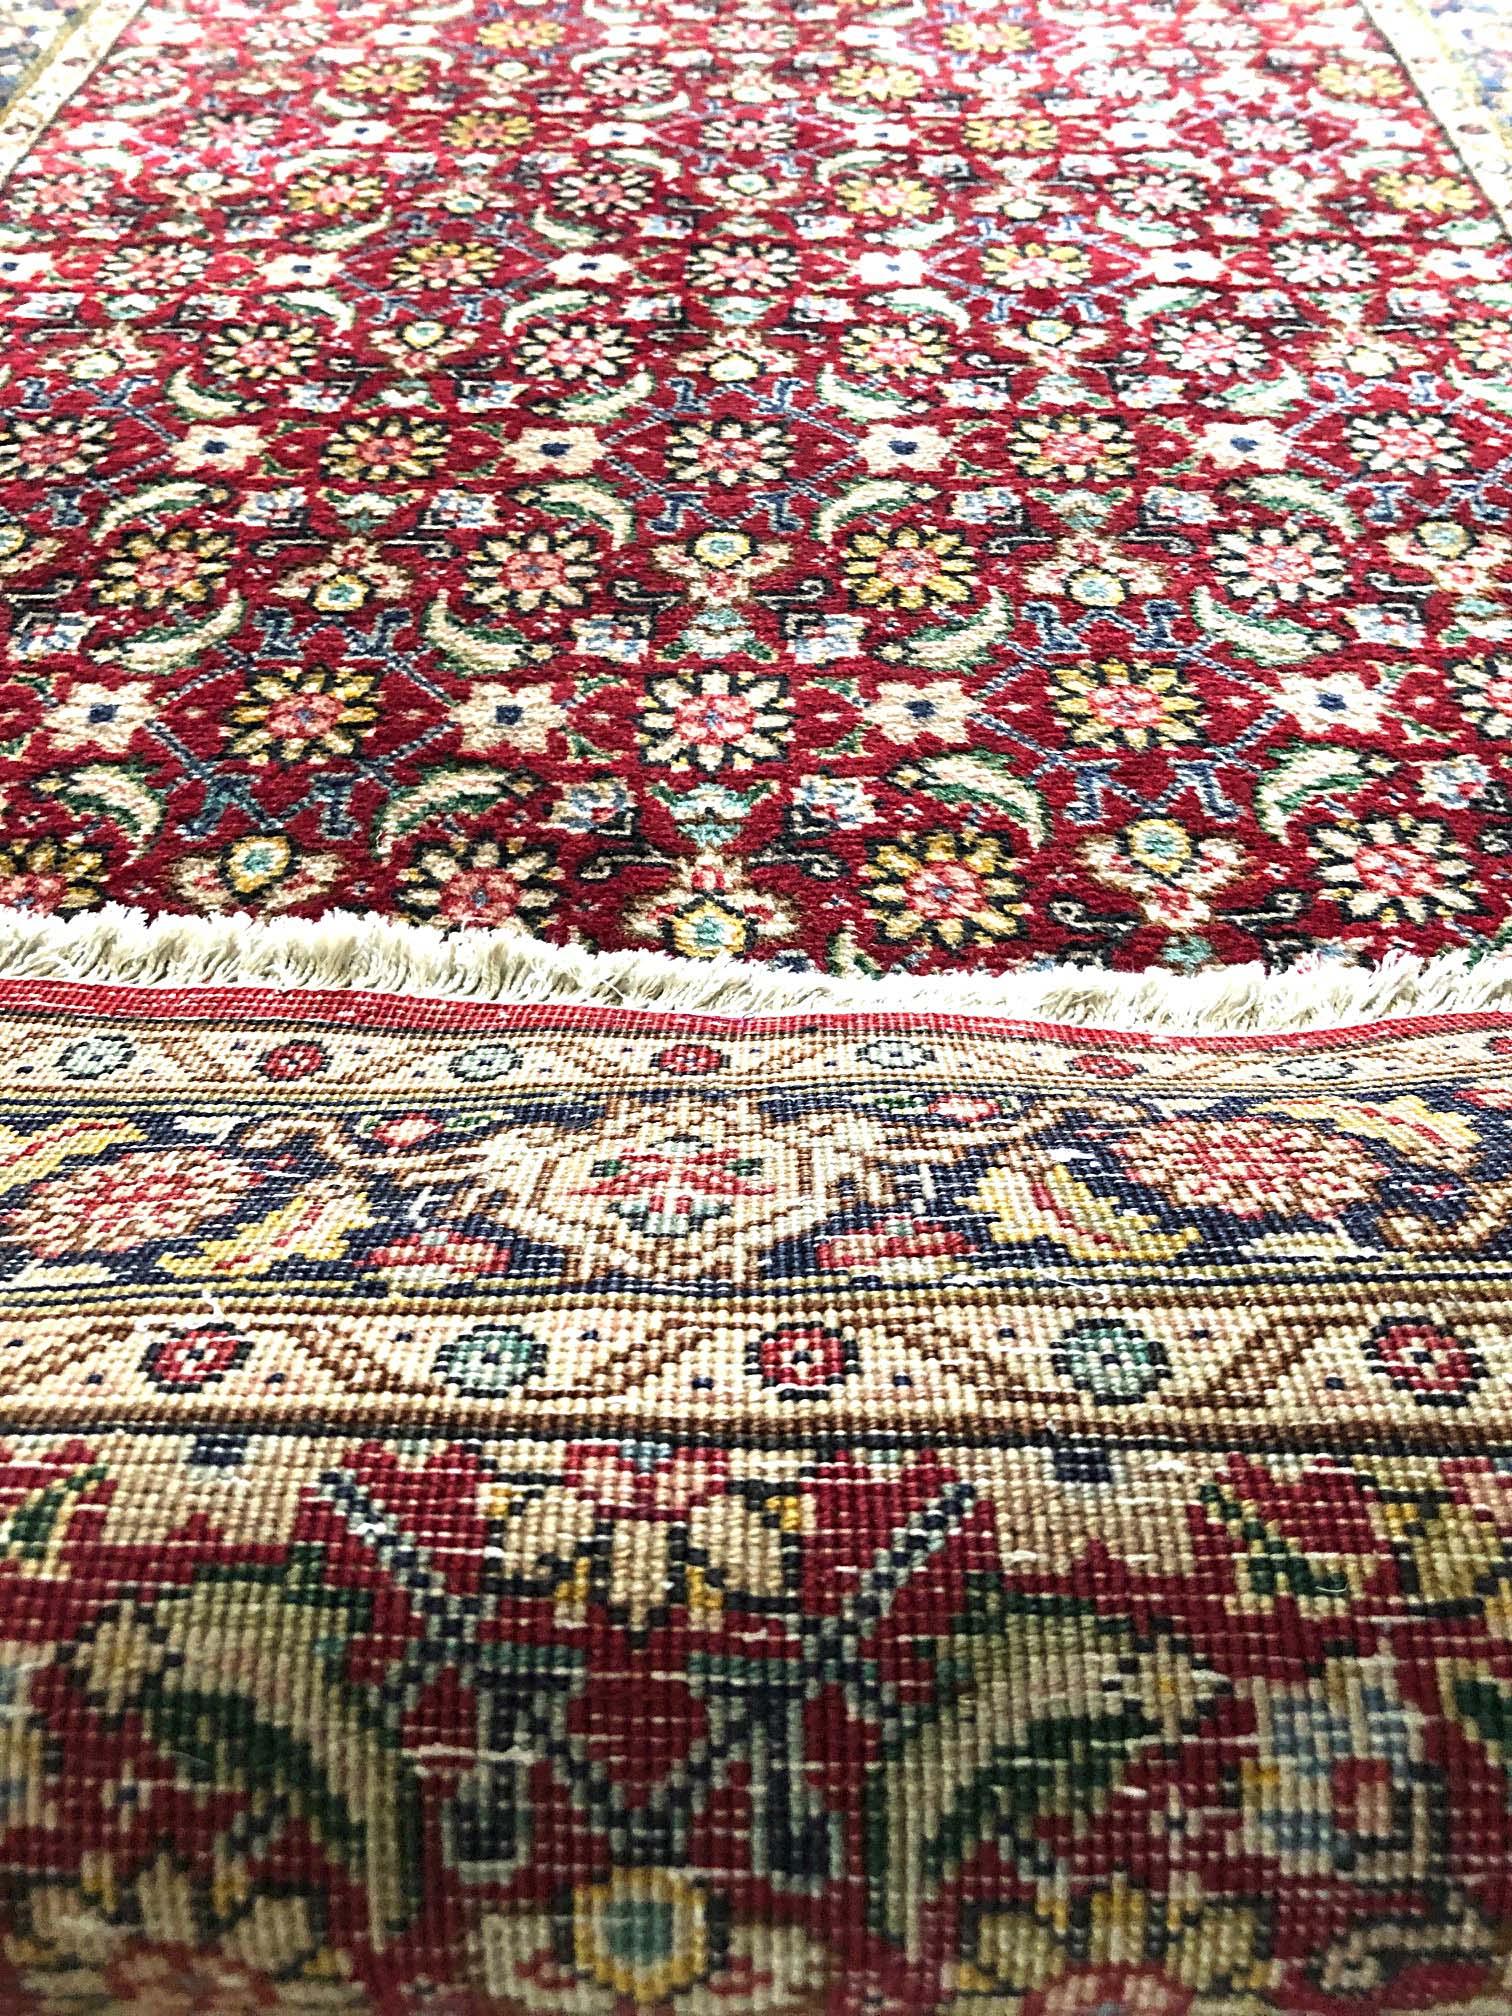 This Persian Tabriz runner has wool pile and cotton foundation. The design is called Herati design, Herati rugs are quite well known among the different styles of Persian rugs. The base color is red and border is dark blue. The size is 2 feet 9